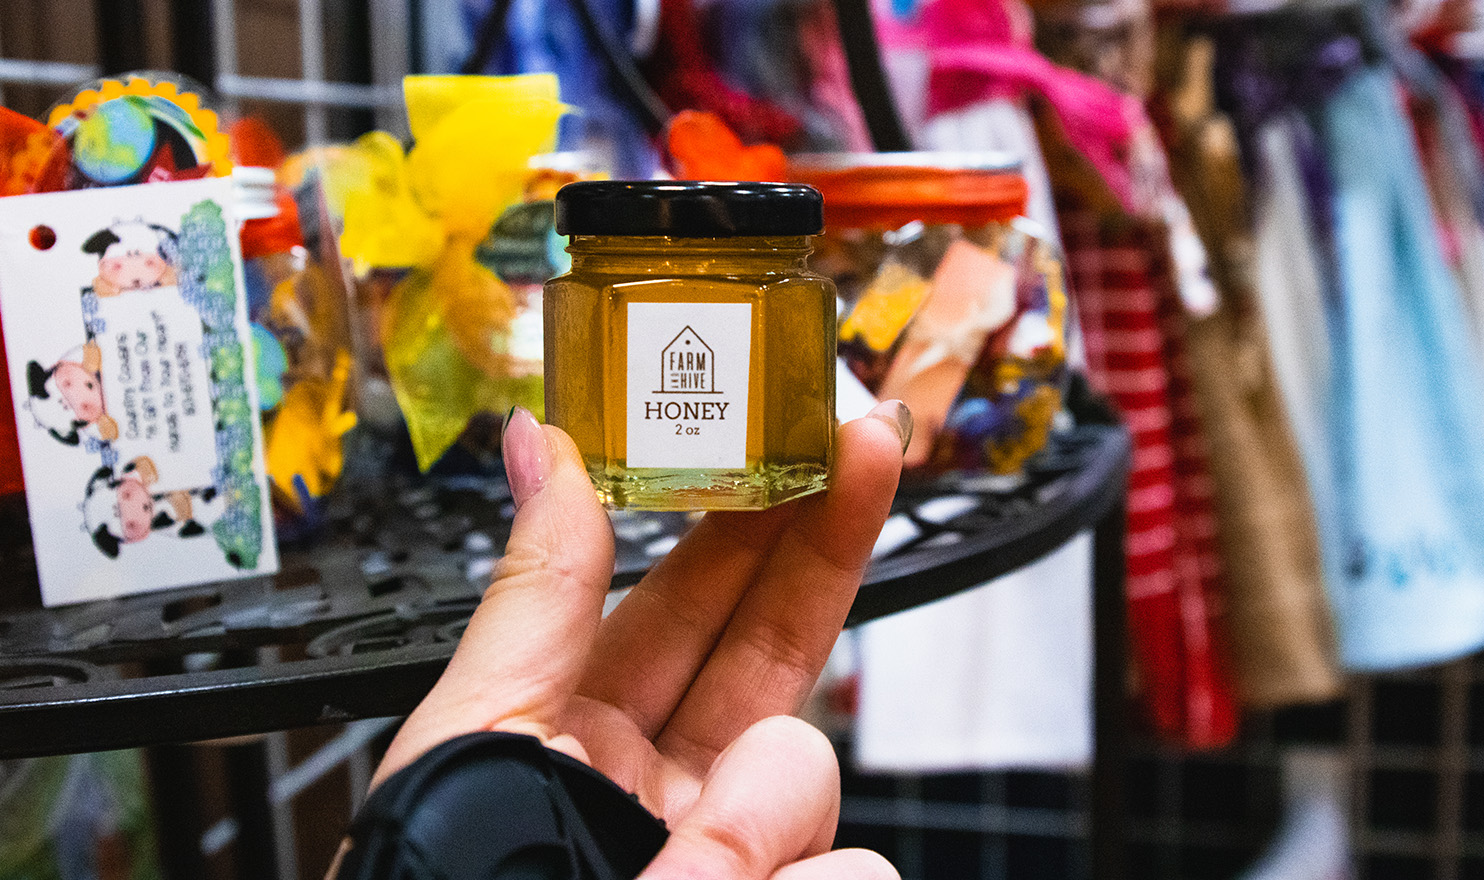 An image of a small pot of honey being held up with a booth at Holy Cow Boutique in the background.